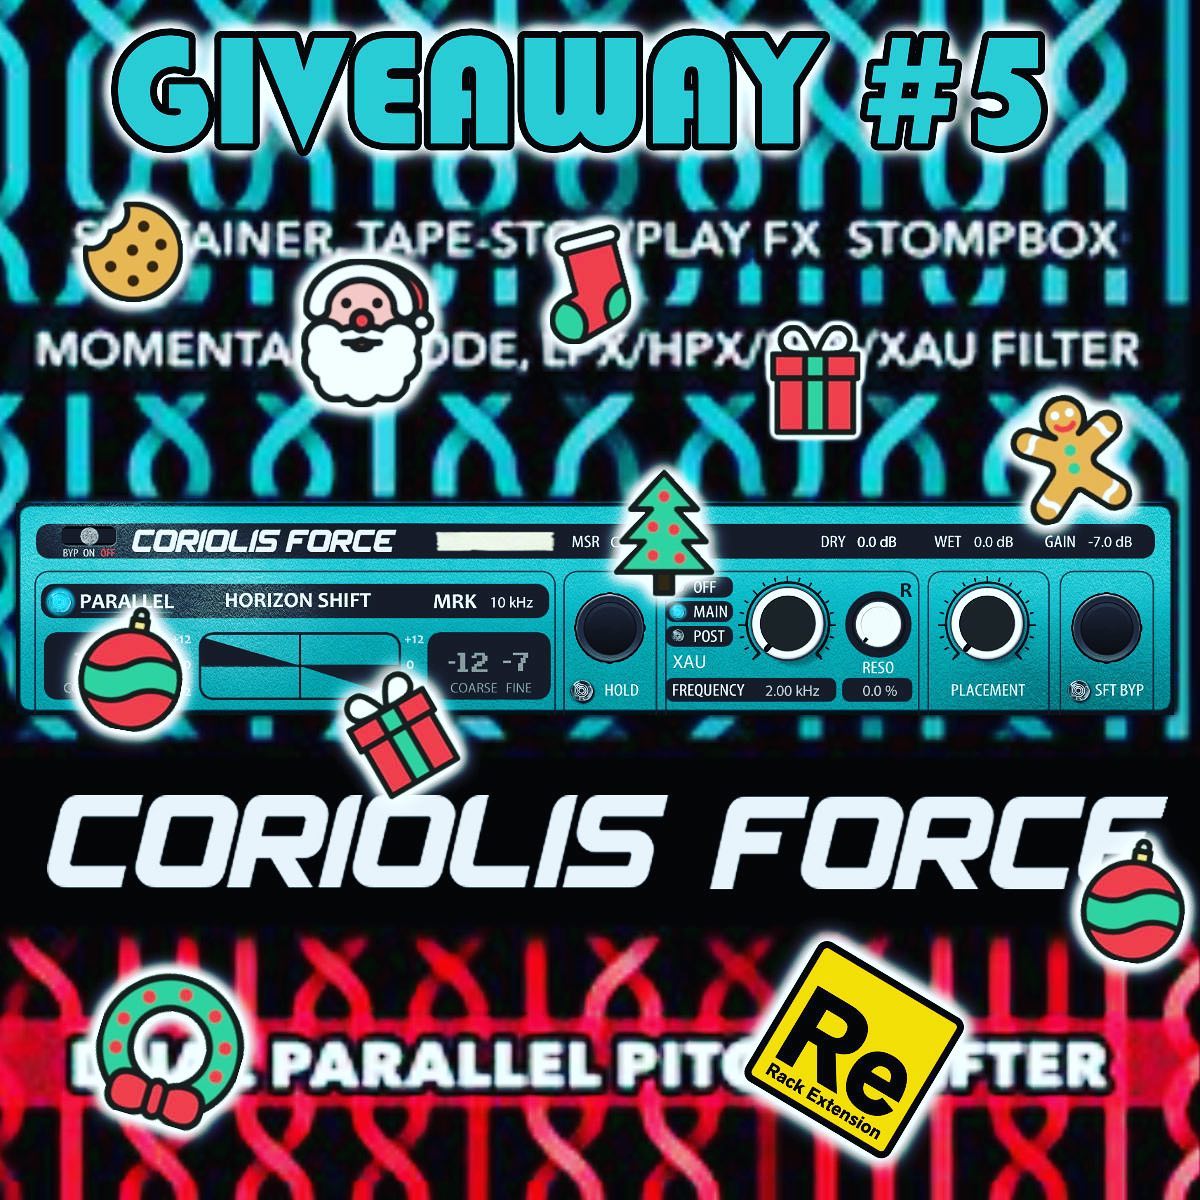 Win "CORIOLIS FORCE" Creative Pitch Shifter (RackExtension).
Just entering the Giveaway from #Turn2on, you have all chances to win in everyday Giveaways up to 31 December
Win #RackExtension #CoriolisForce for #Reason by Reason Studios
#Giveaways #gift 
https://turn2on.com/giveaway/xmas-giveaway-5/